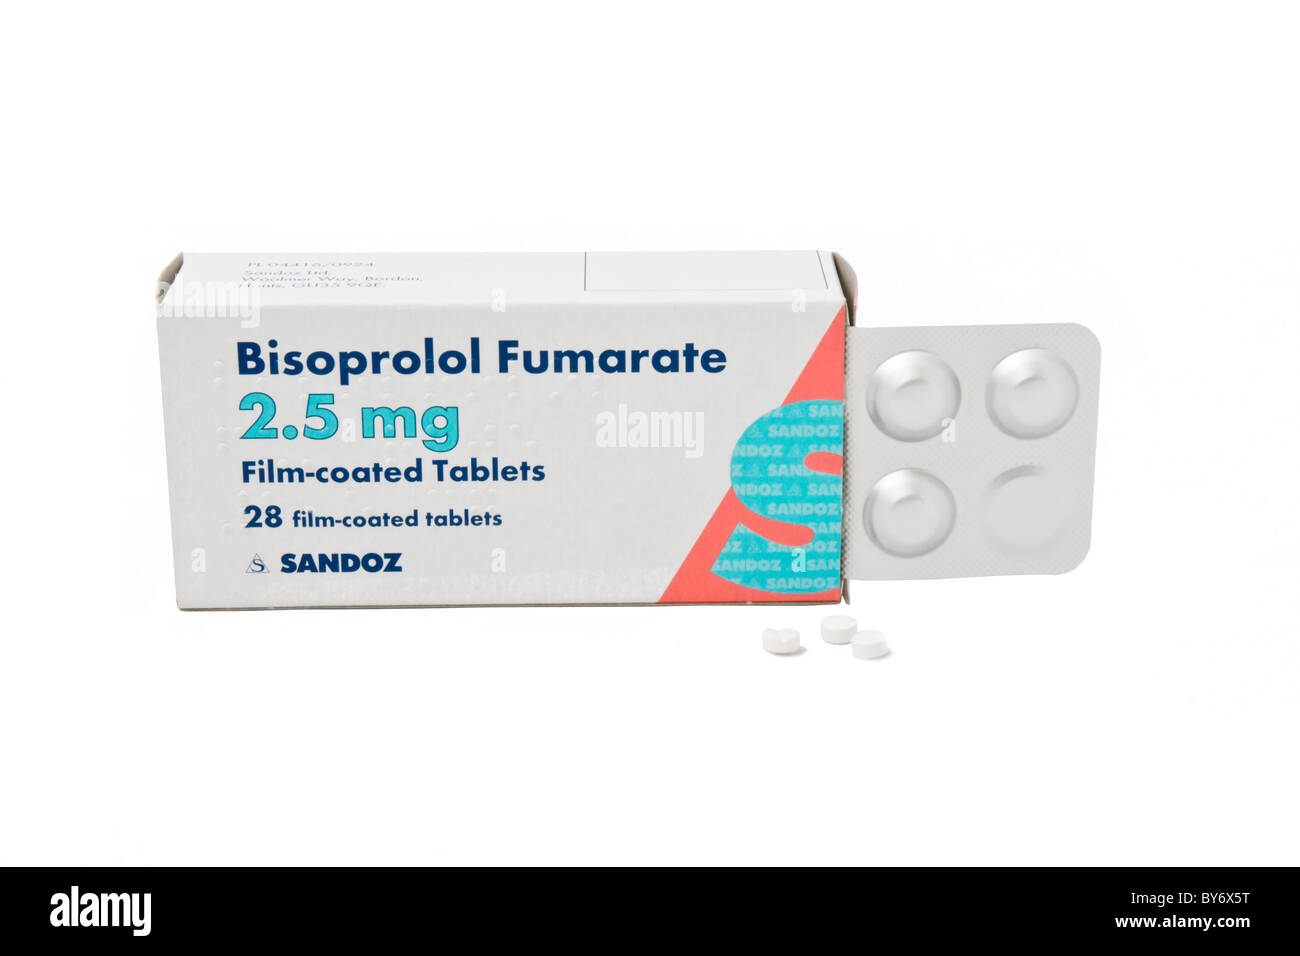 Bisoprolol Fumarate, a beta-blocker type drug for the treatment of hypertension (high blood pressure) Stock Photo